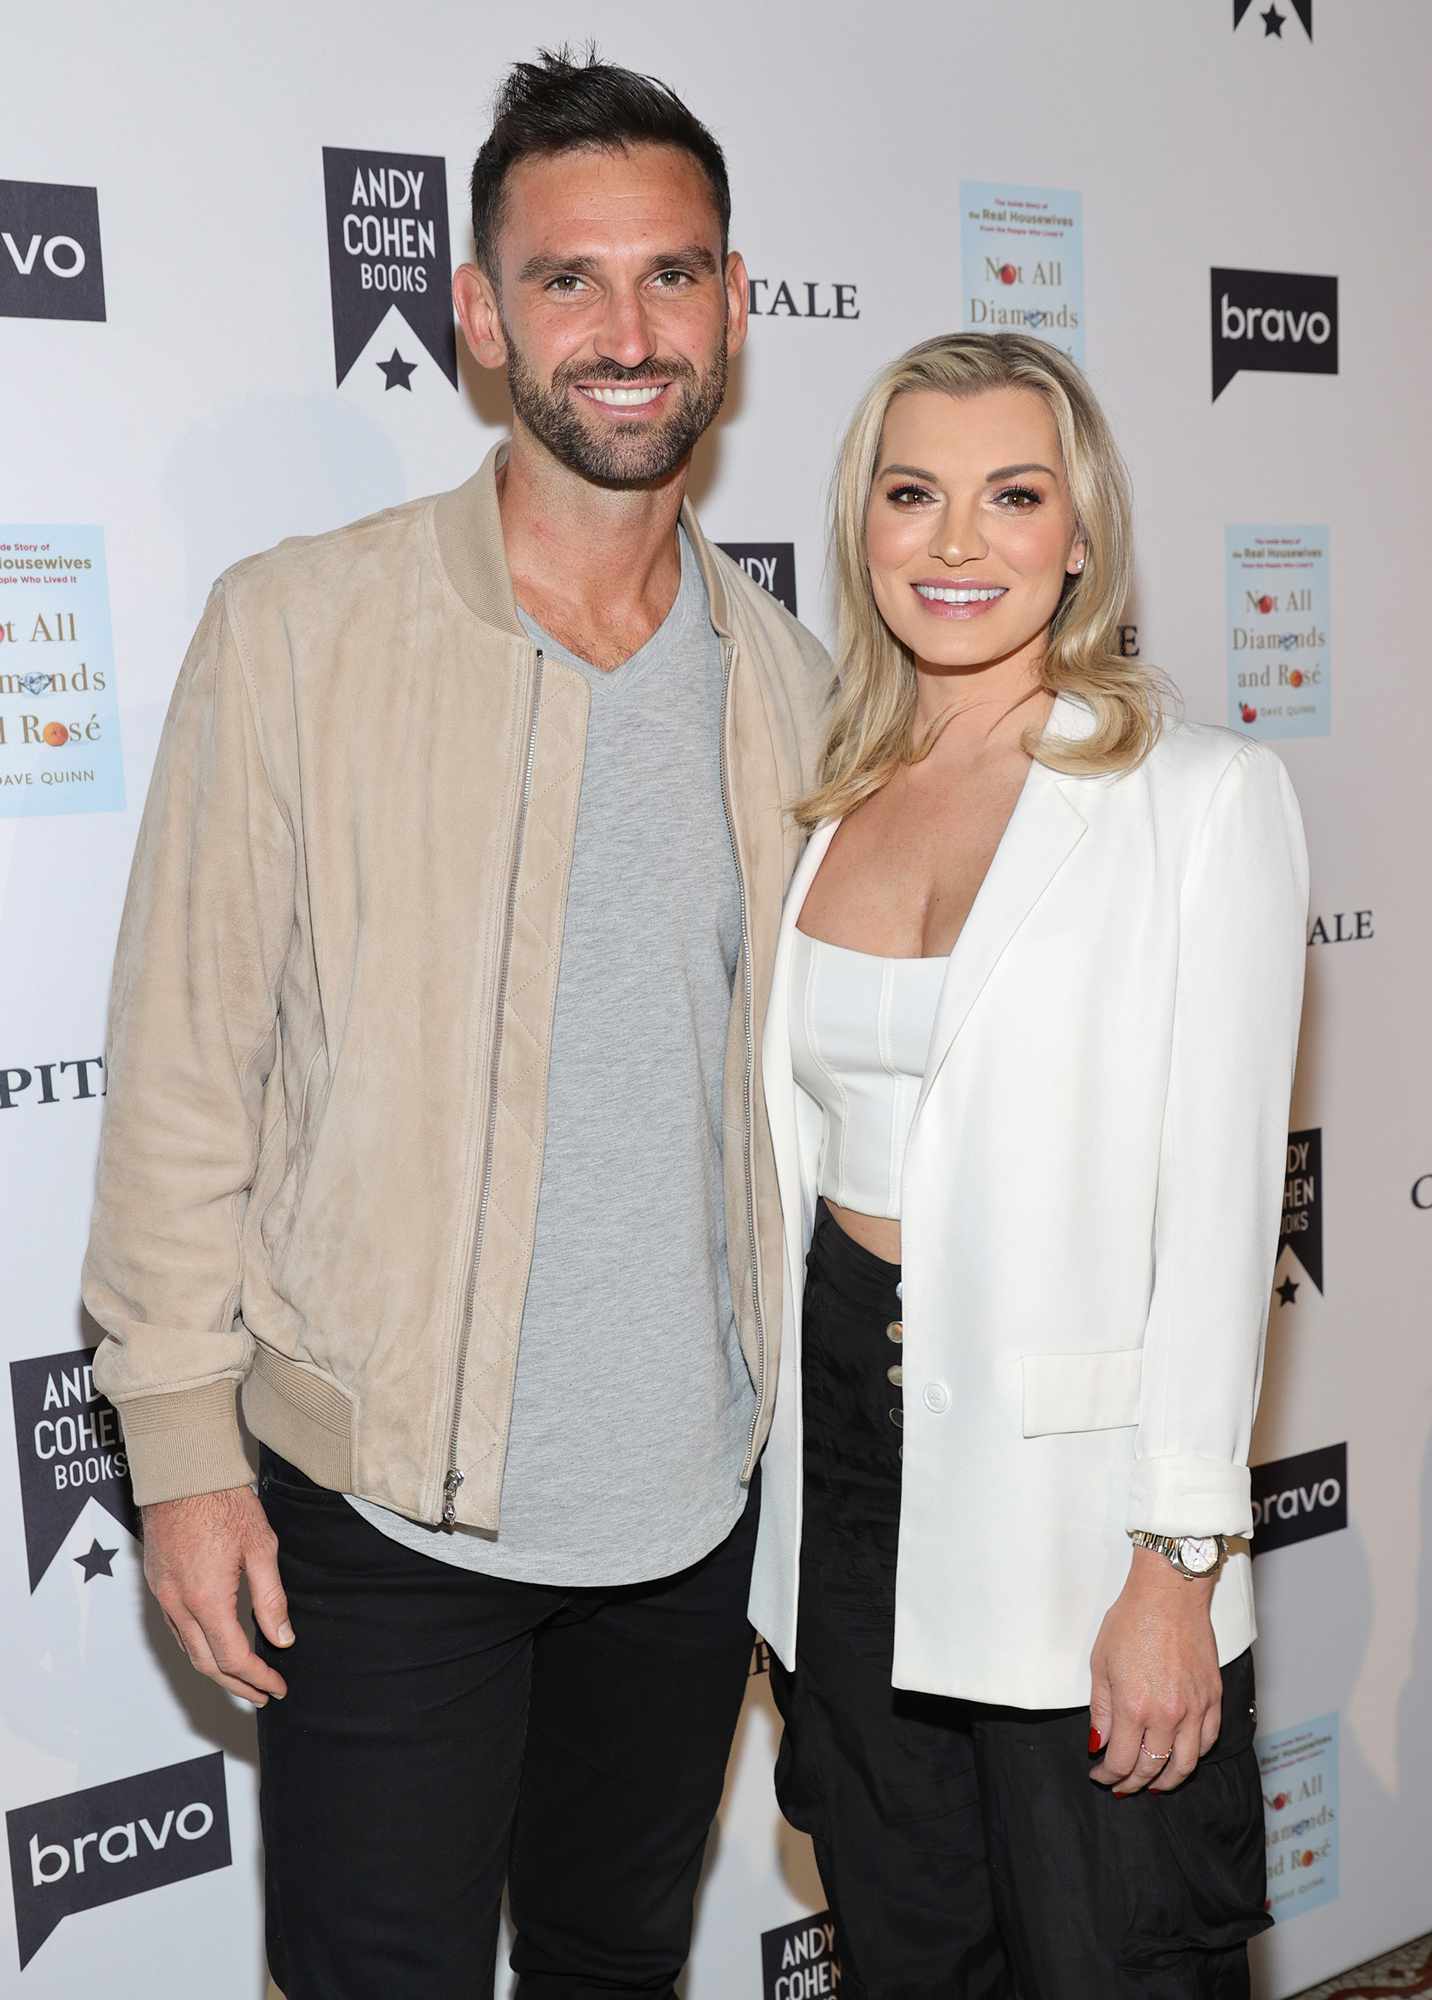 Carl Radke and Lindsay Hubbard attend the launch party for the book "Not All Diamonds and Rosé: The Inside Story of The Real Housewives from the People Who Lived It" at Capitale on October 19, 2021 in New York City.